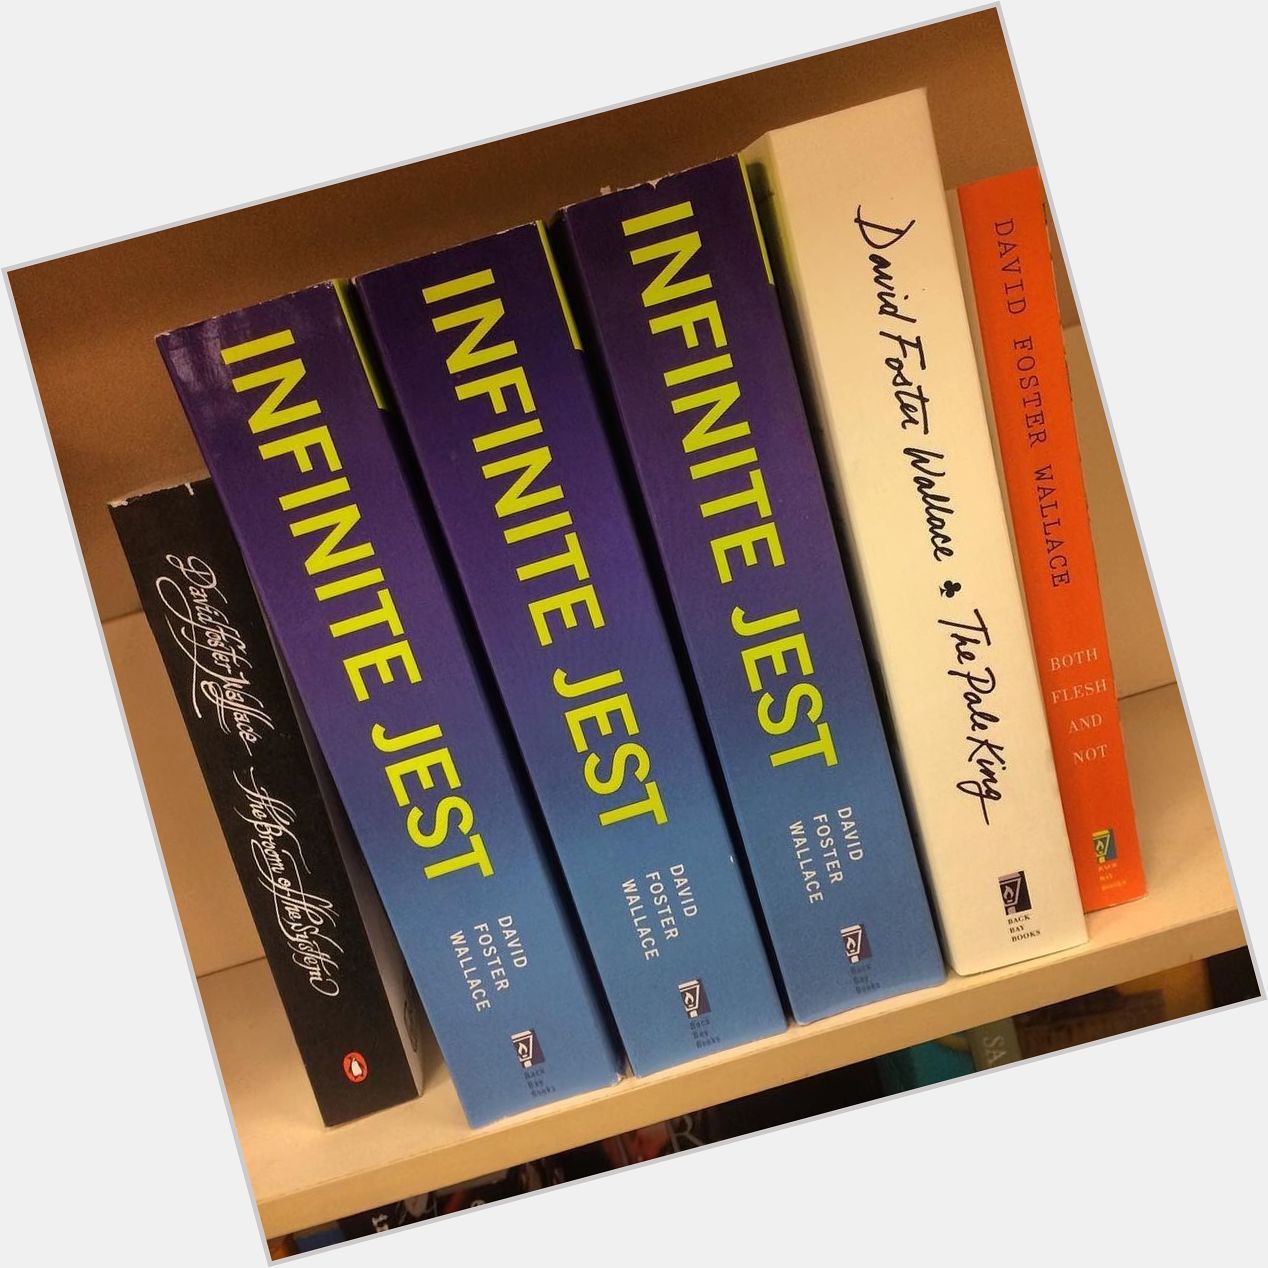 Happy birthday David Foster Wallace! Look at these new copies of \"Infinite Jest\". The spin 